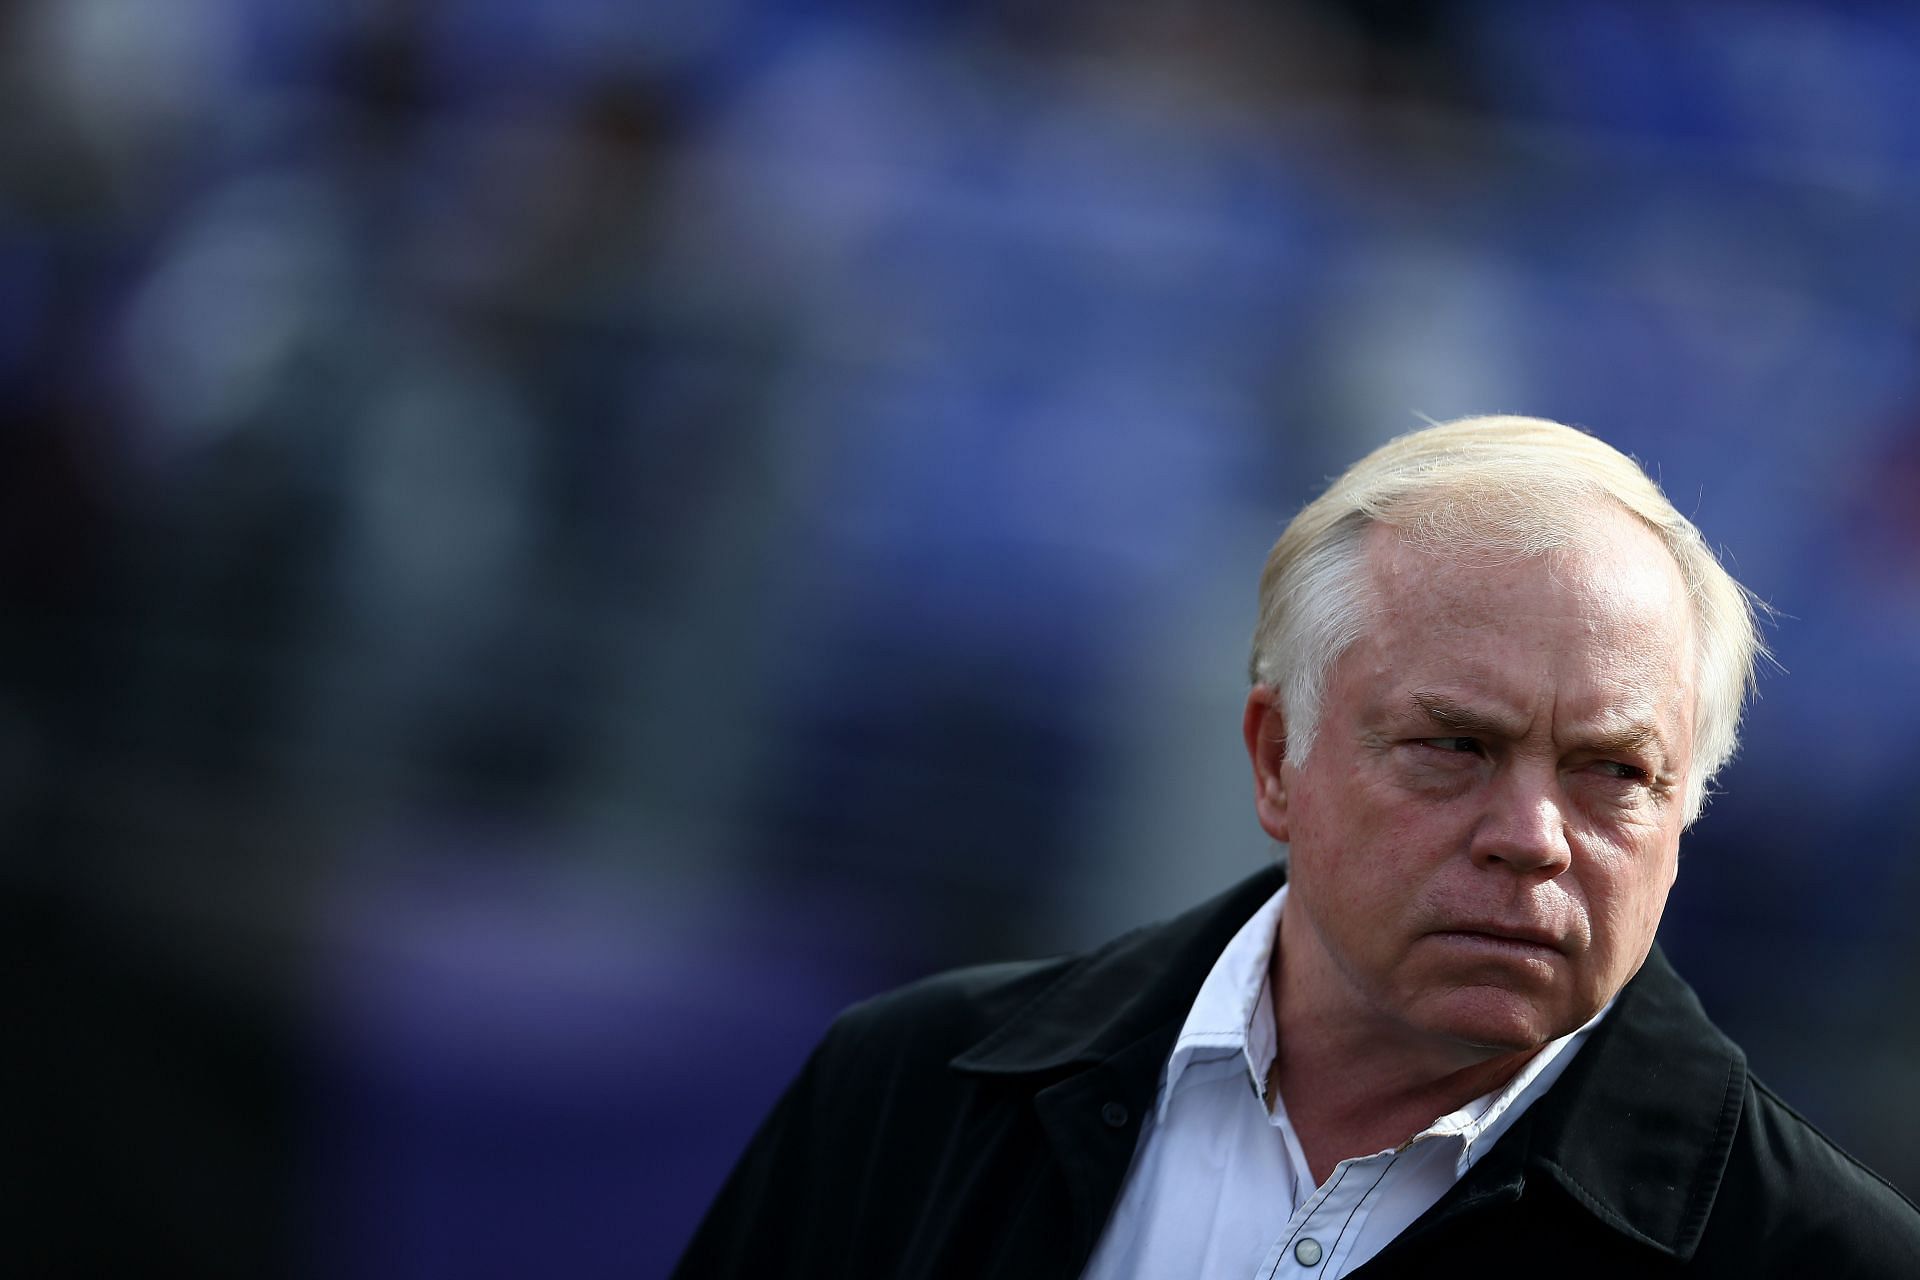 Will Buck Showalter continue this trend of getting his starters to do relief innings?